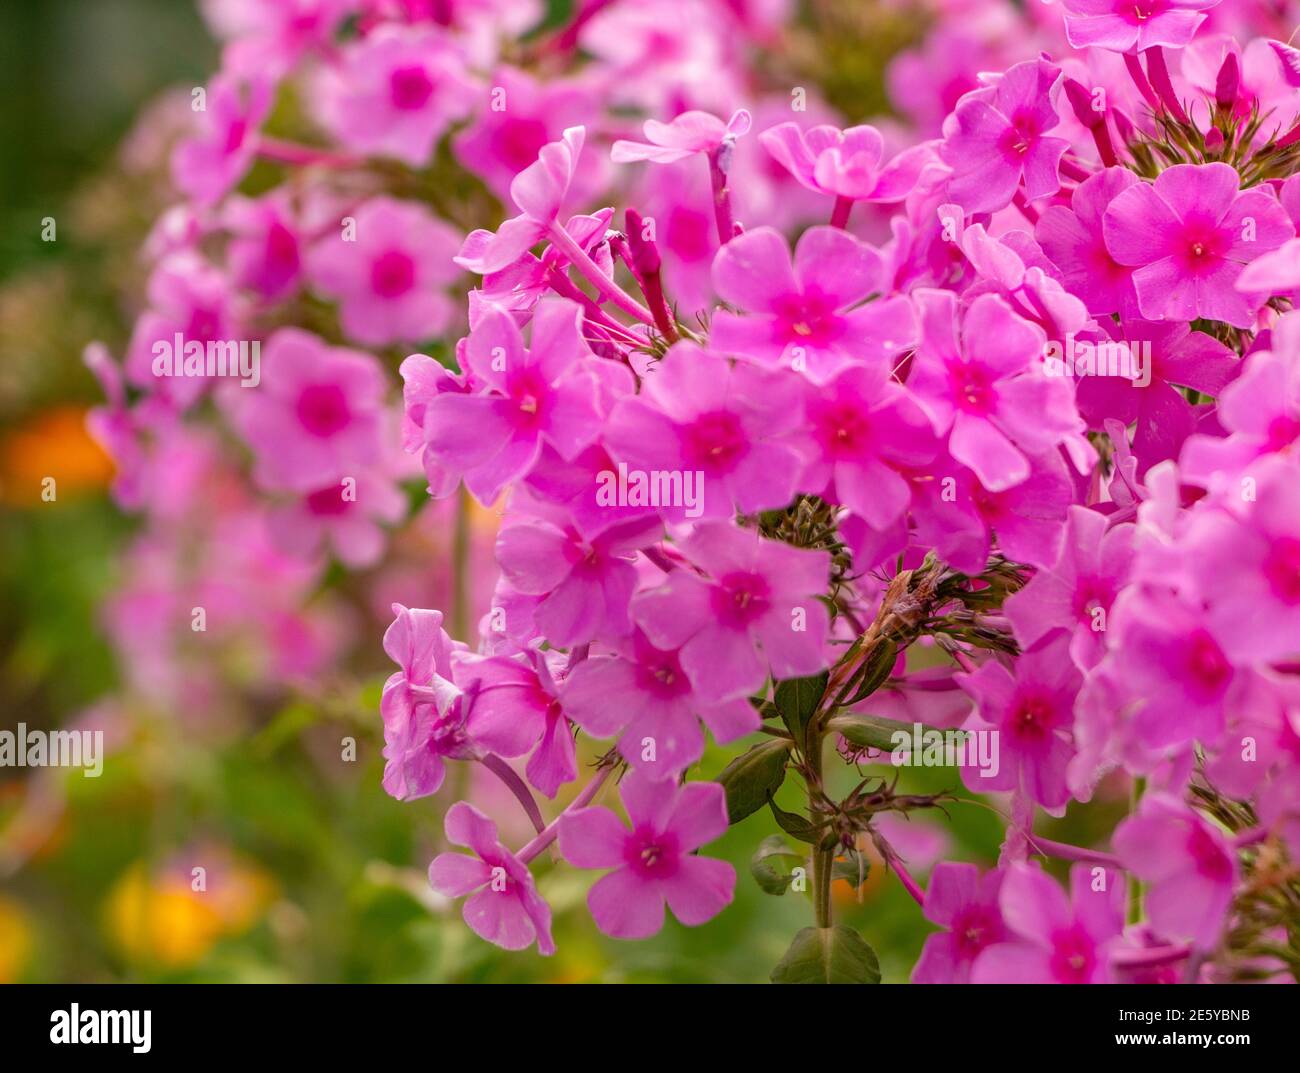 A picture of a Garden Fall Phlox pink flowers. Stock Photo